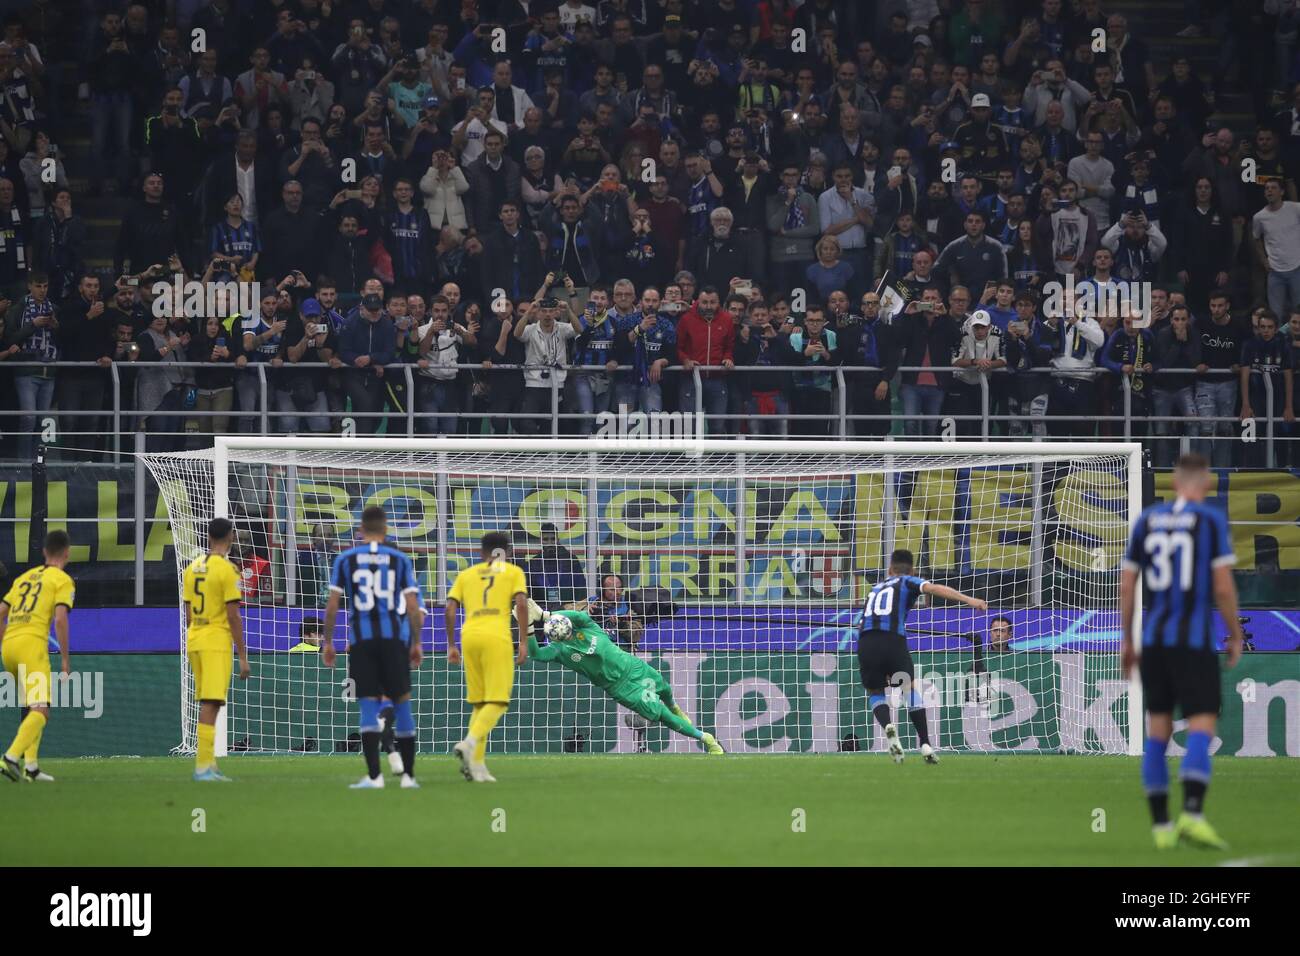 Roman Burki of Borussia Dortmund saves a penalty from Lautaro Martinez of Inter during the UEFA Champions League match at Giuseppe Meazza, Milan. Picture date: 23rd October 2019. Picture credit should read: Jonathan Moscrop/Sportimage via PA Images Stock Photo